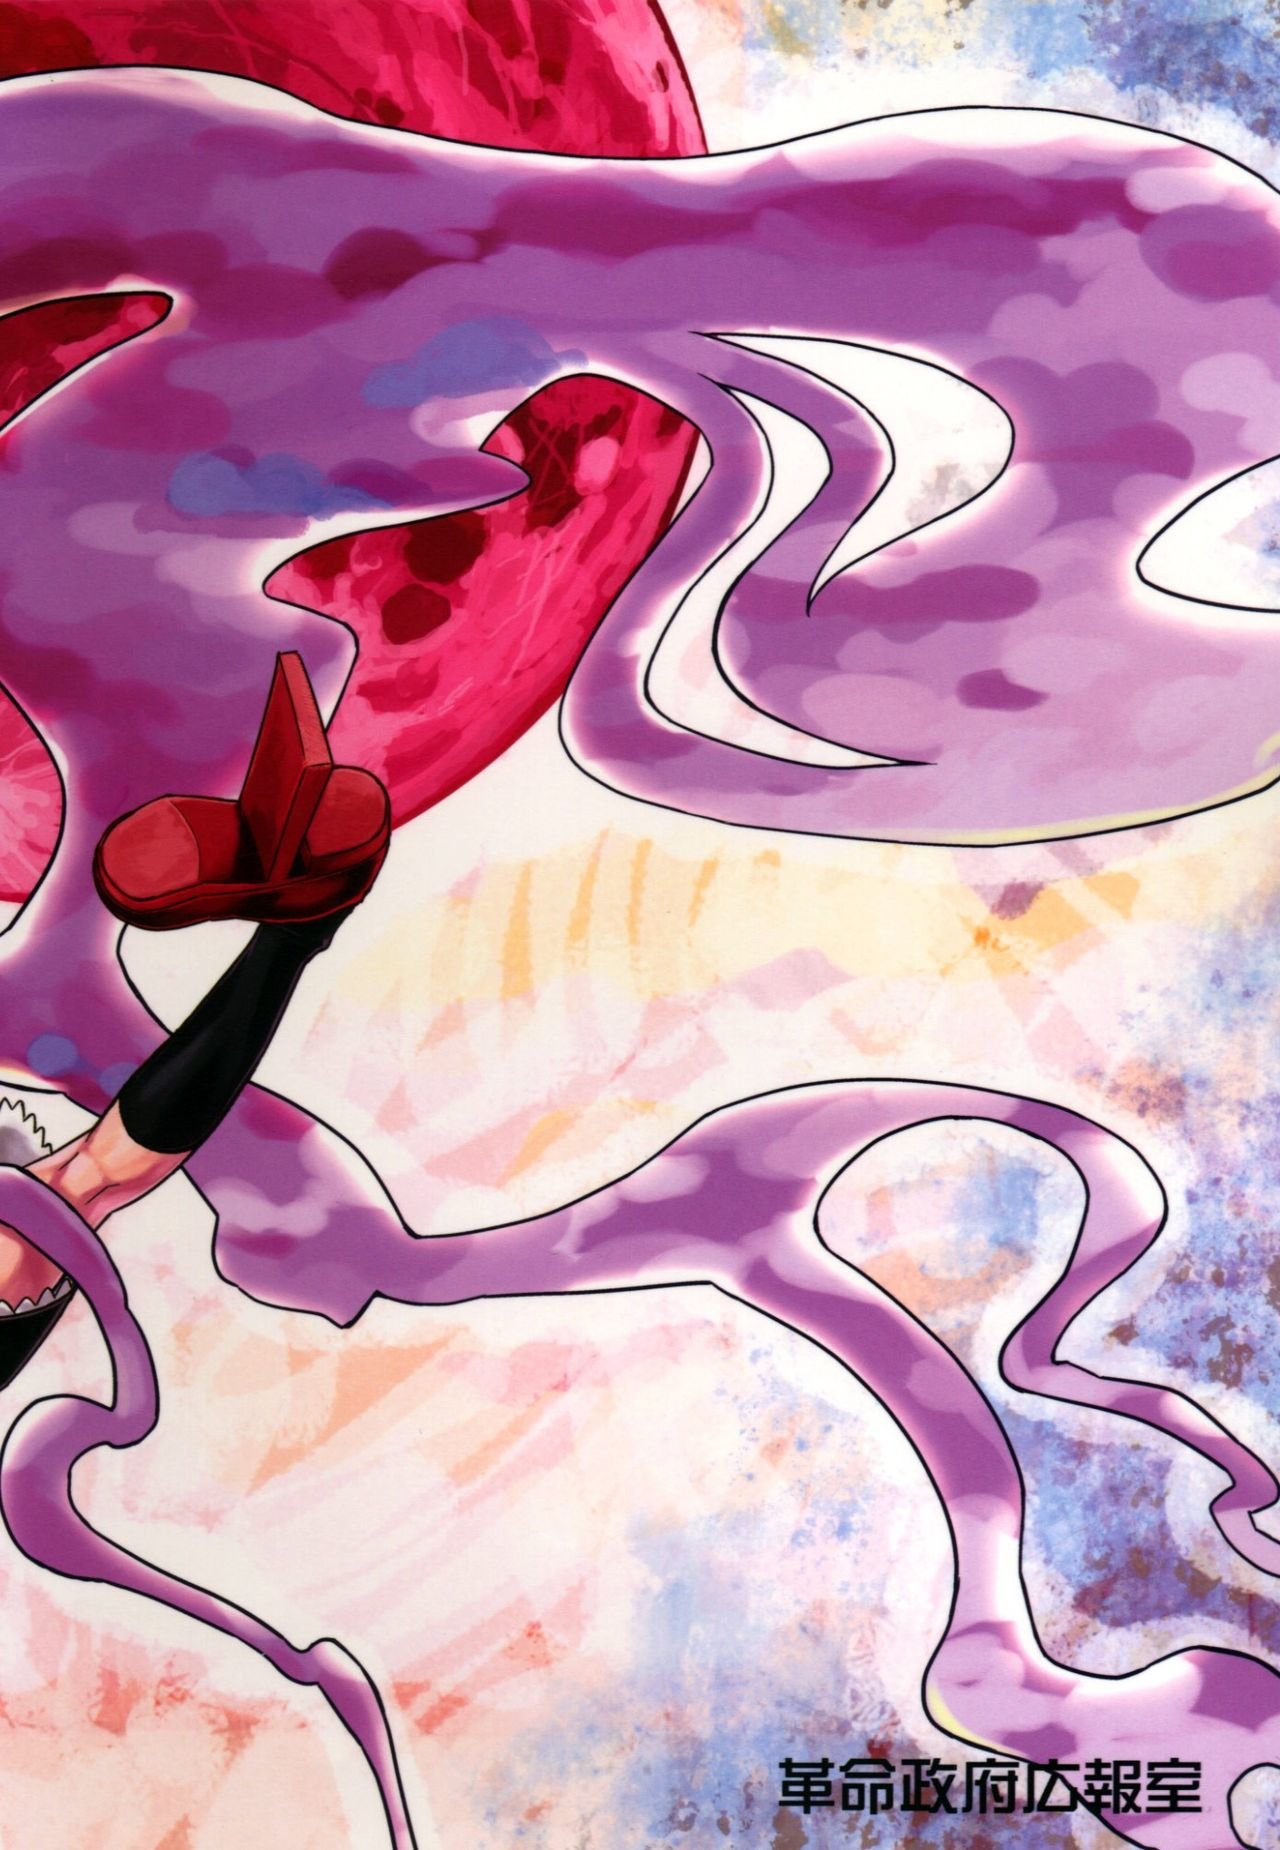 Lunatic Udon (Touhou Project) - 33